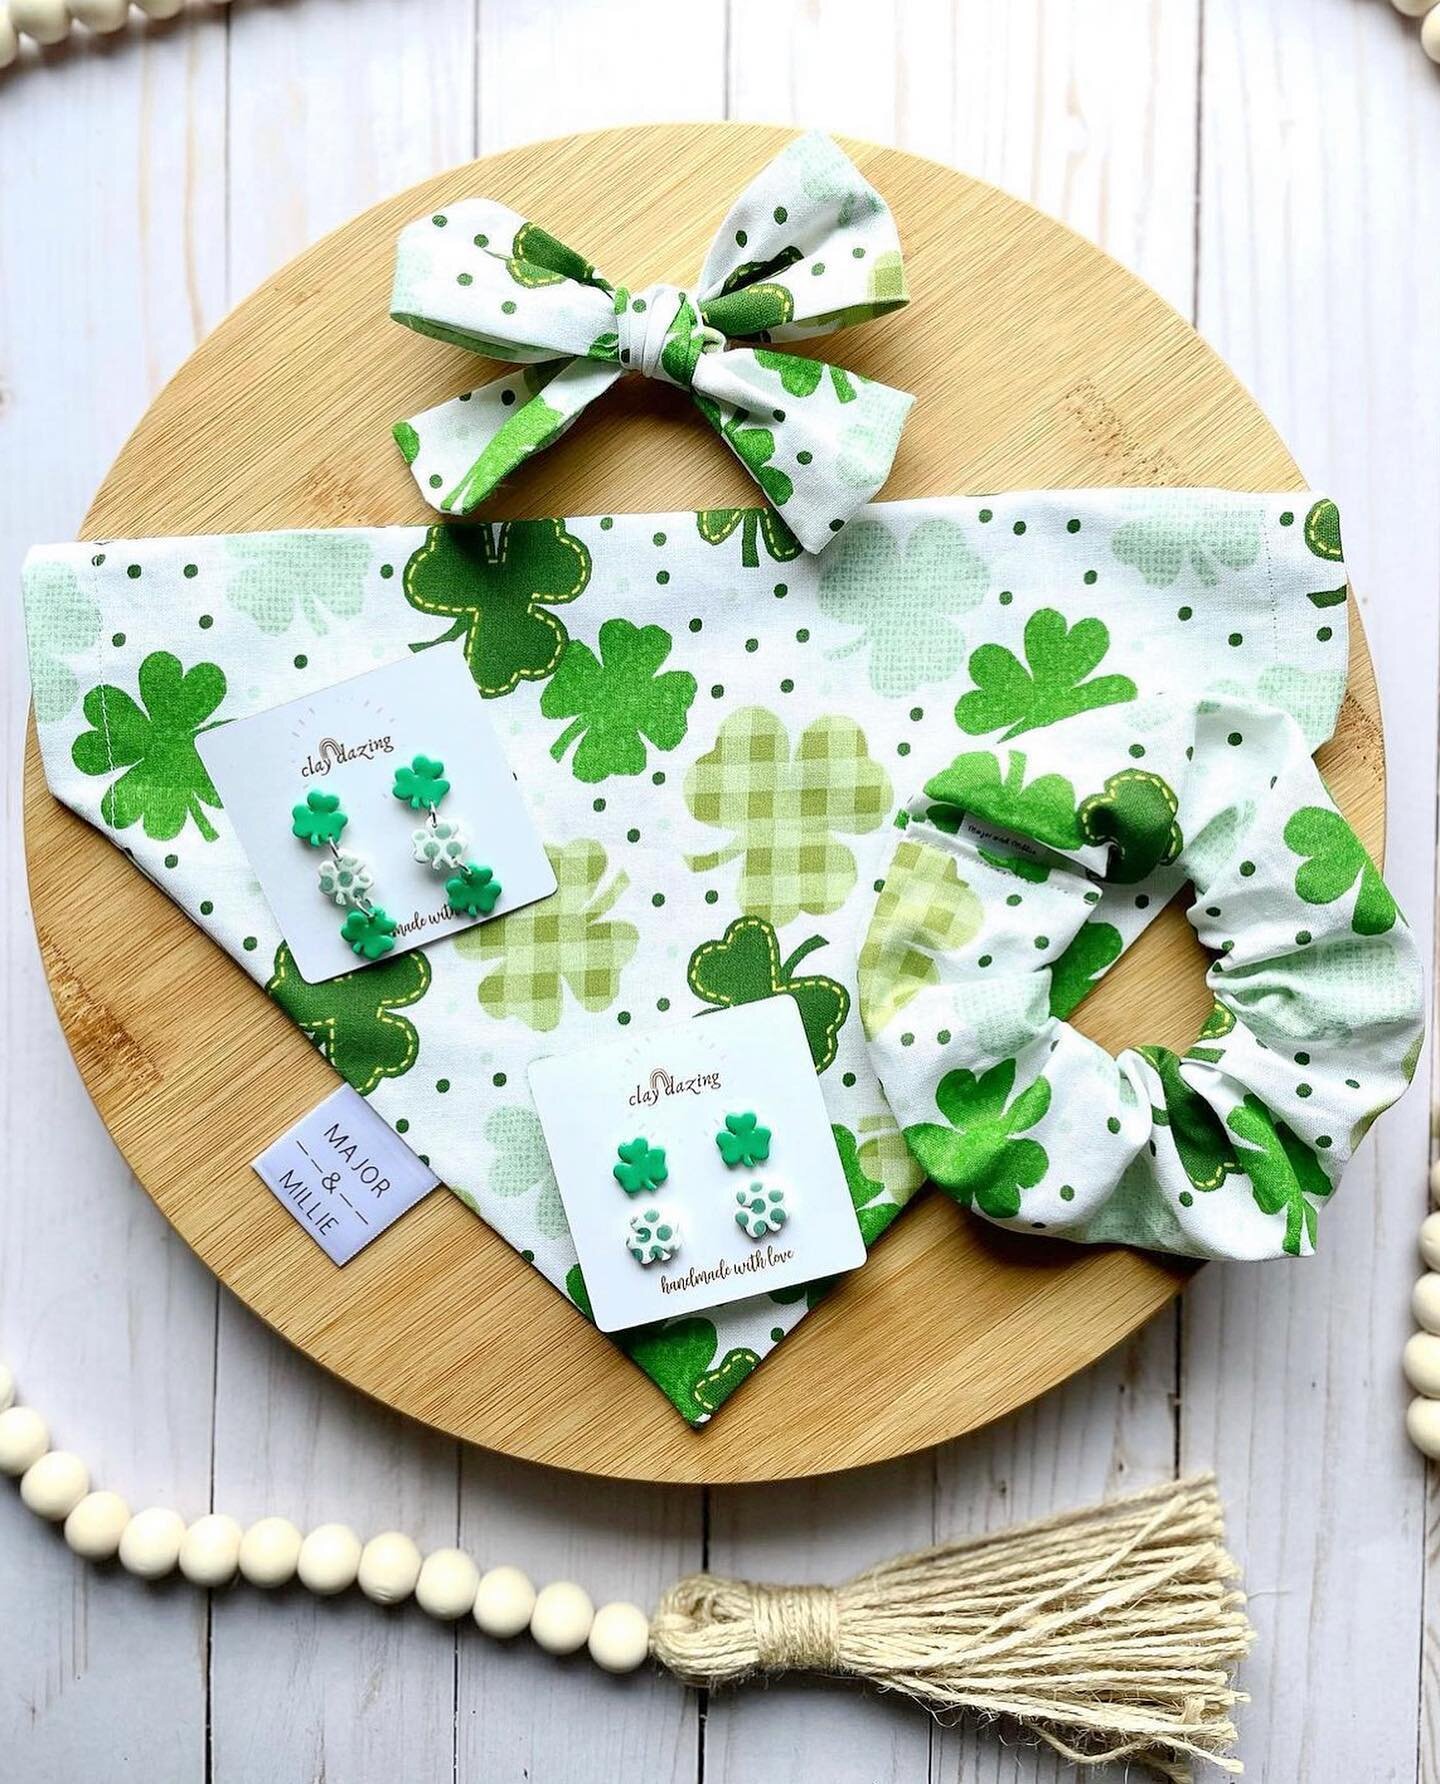 St. Patrick&rsquo;s Day is 3 weeks away! There&rsquo;s still plenty of time to shop! ☘️💚

If you haven&rsquo;t already checked out our sale section we just added a BUNCH of bandanas from all seasons!

#majorandmillie #shopsmall #smallbusiness #stpat